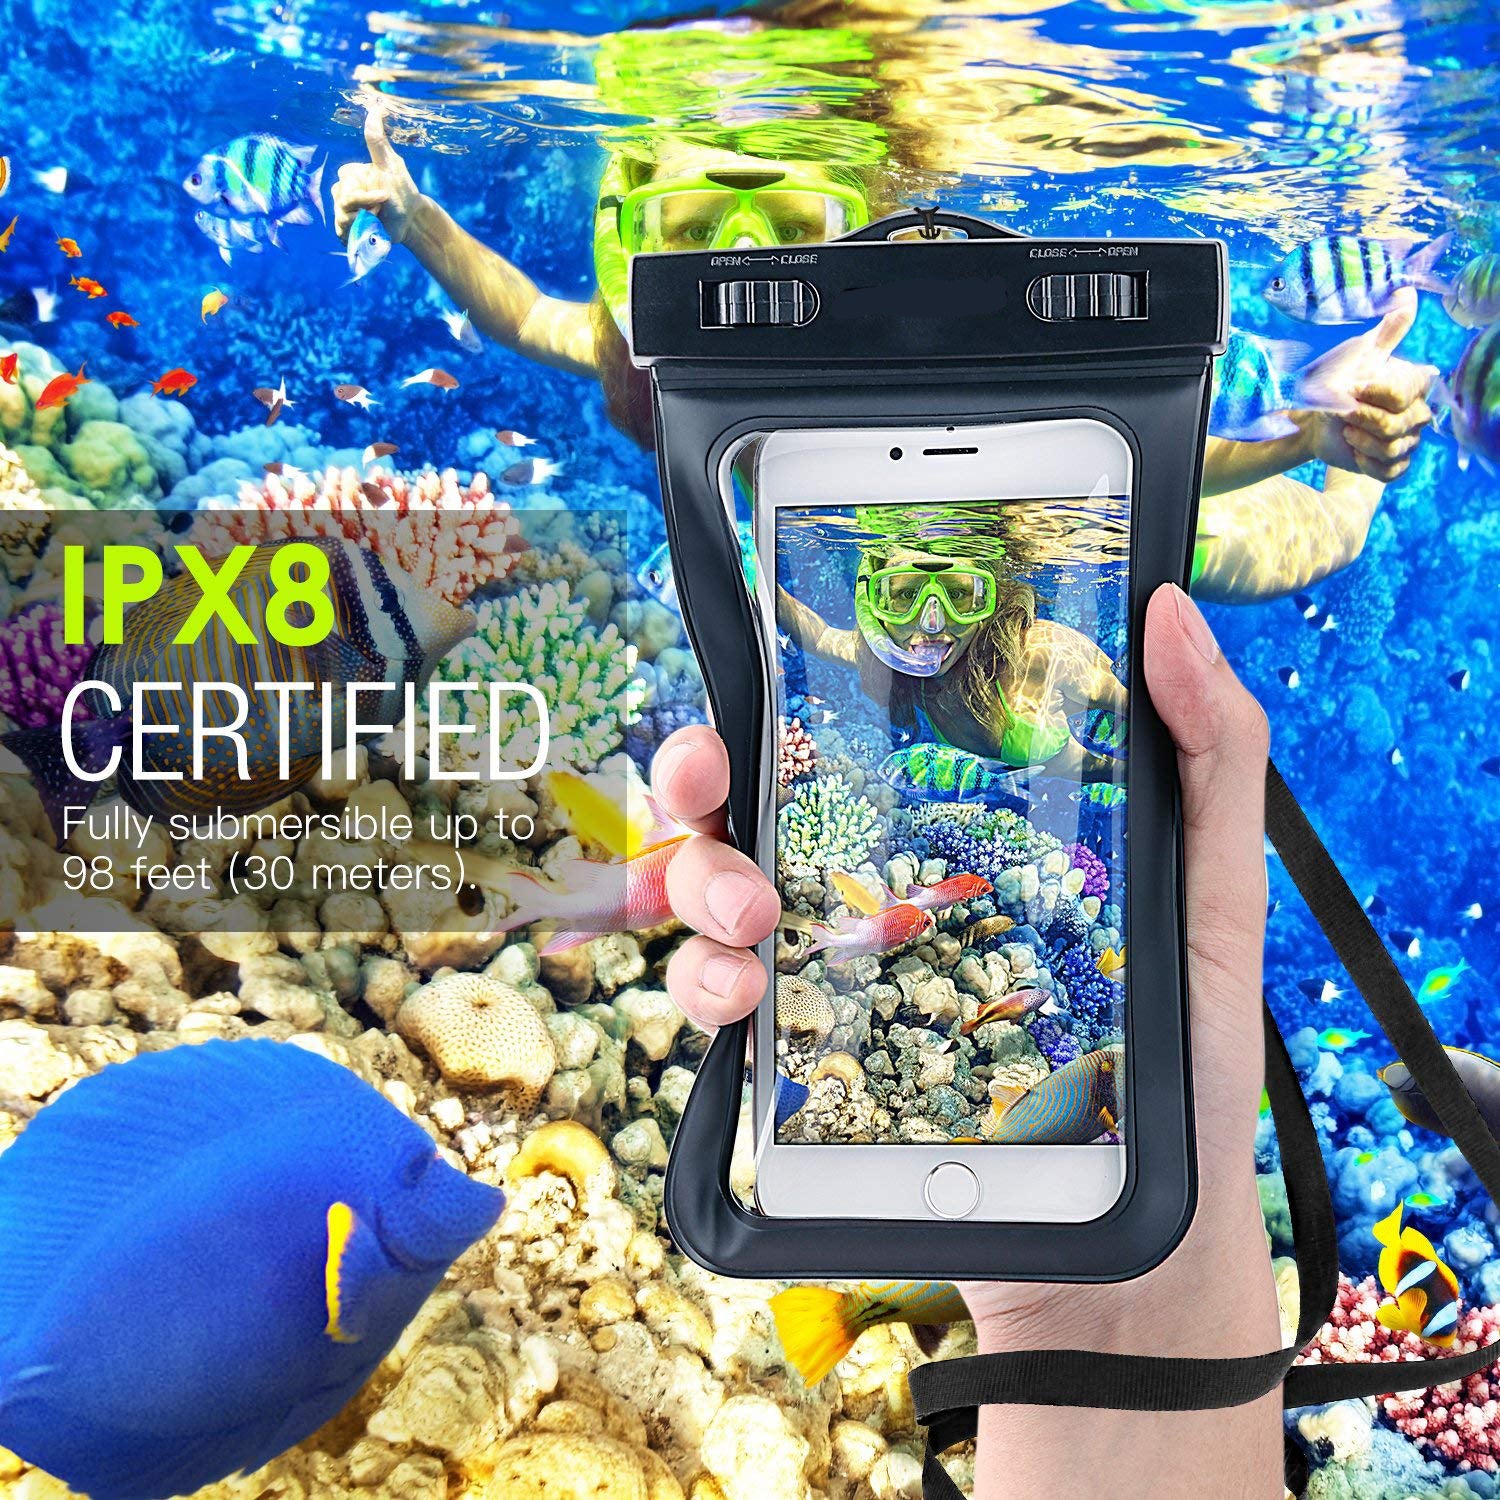 Underwater Waterproof Case for TCL A30 (A3) - Bag Floating Cover Touch Screen Ipx8 Compatible with TCL A30 (a3), Black